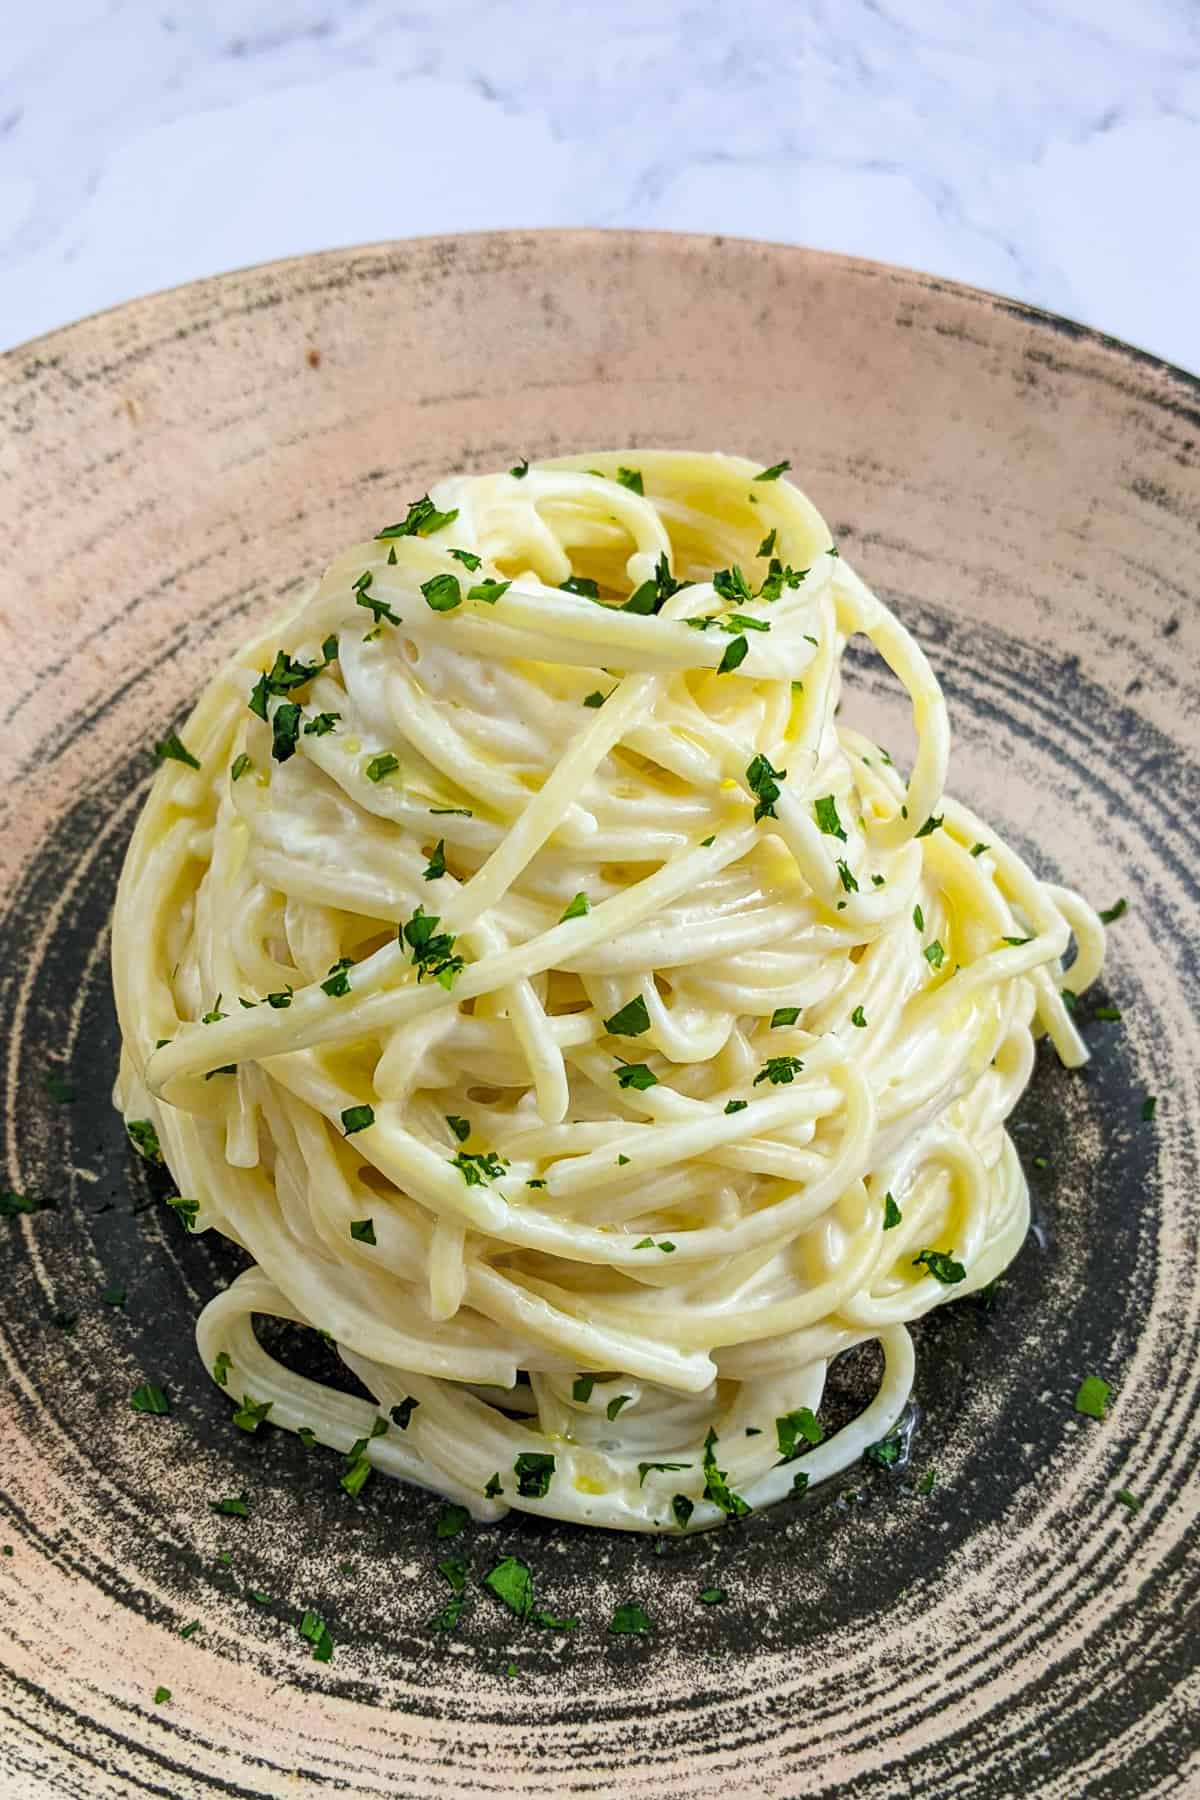 Restaurant style plate spaghetti with cream cheese and chopped parsley.